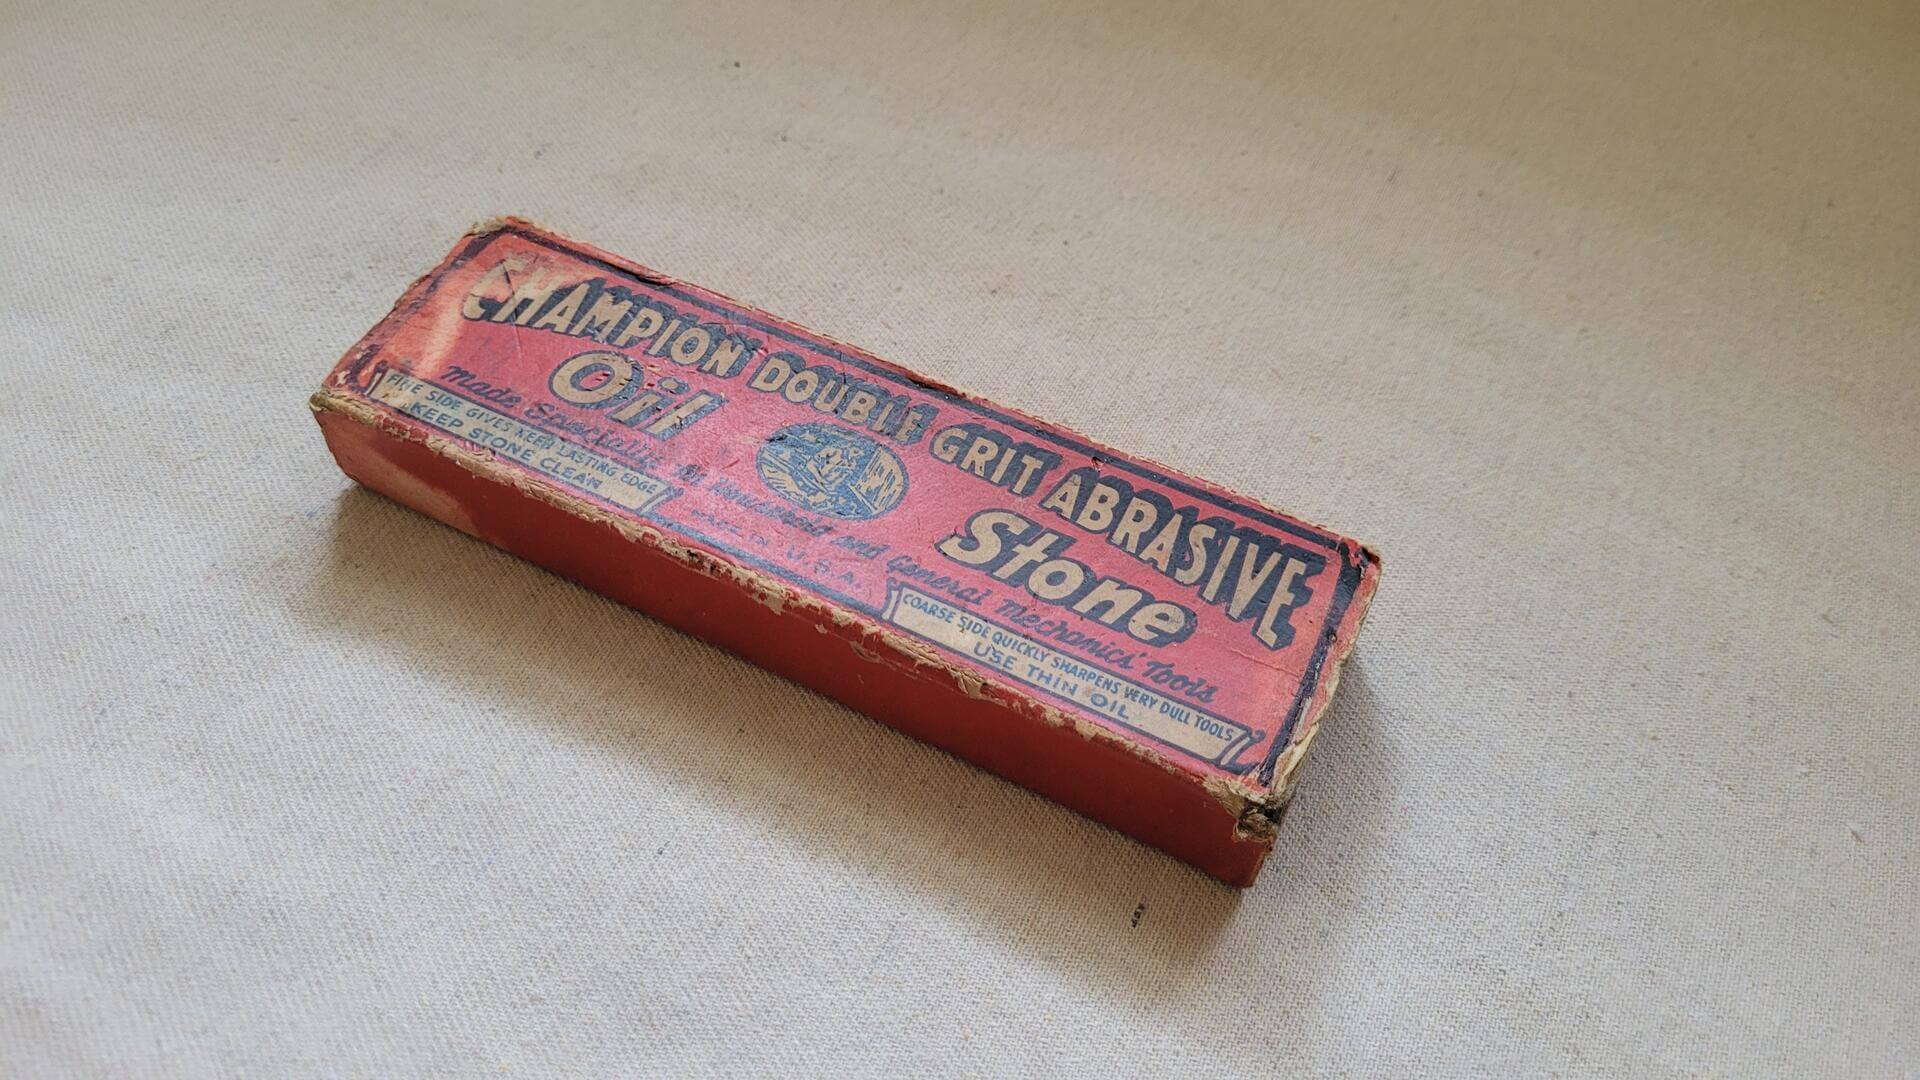 Vintage Champion Double Grit Abrasive Oil Sharpening Stone w Box - Antique made in USA collectible honing stone for knives, planes, and other hand tools